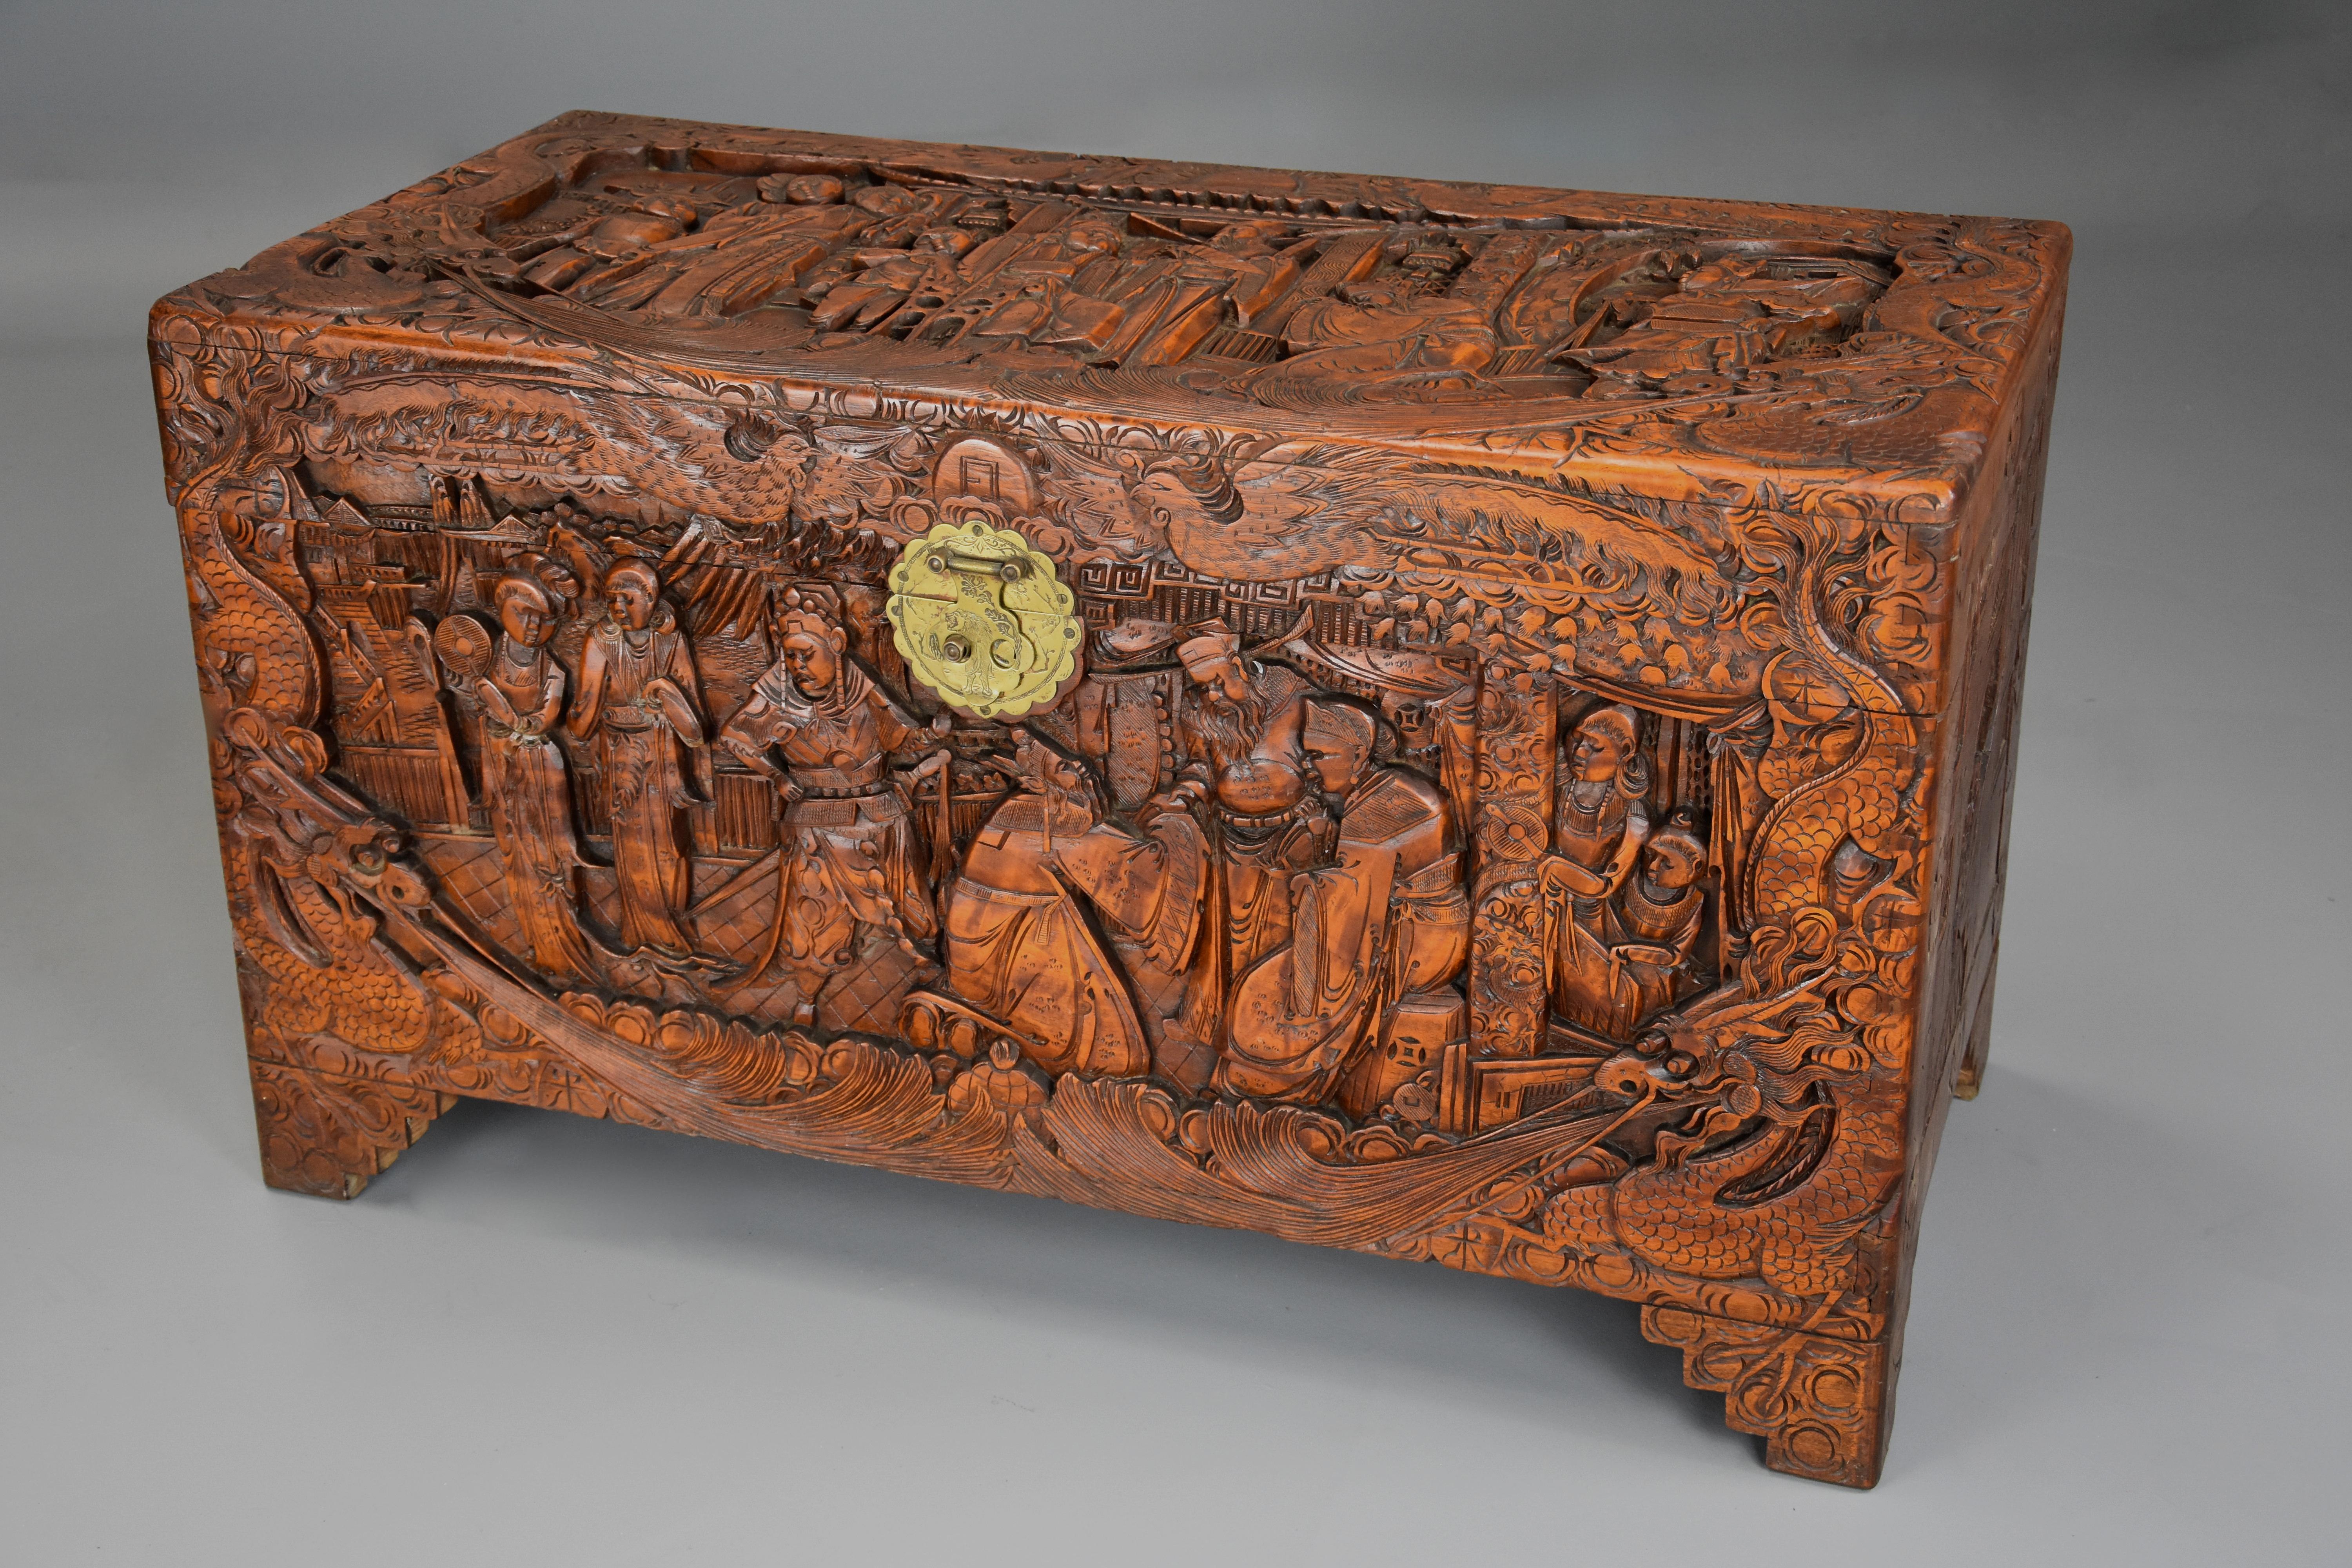 A highly decorative mid-20th century profusely and deep carved Eastern camphor wood freestanding chest or trunk. 

This camphor chest consists of a superbly carved top depicting traditional Oriental scene with a border of carved dragon and bird